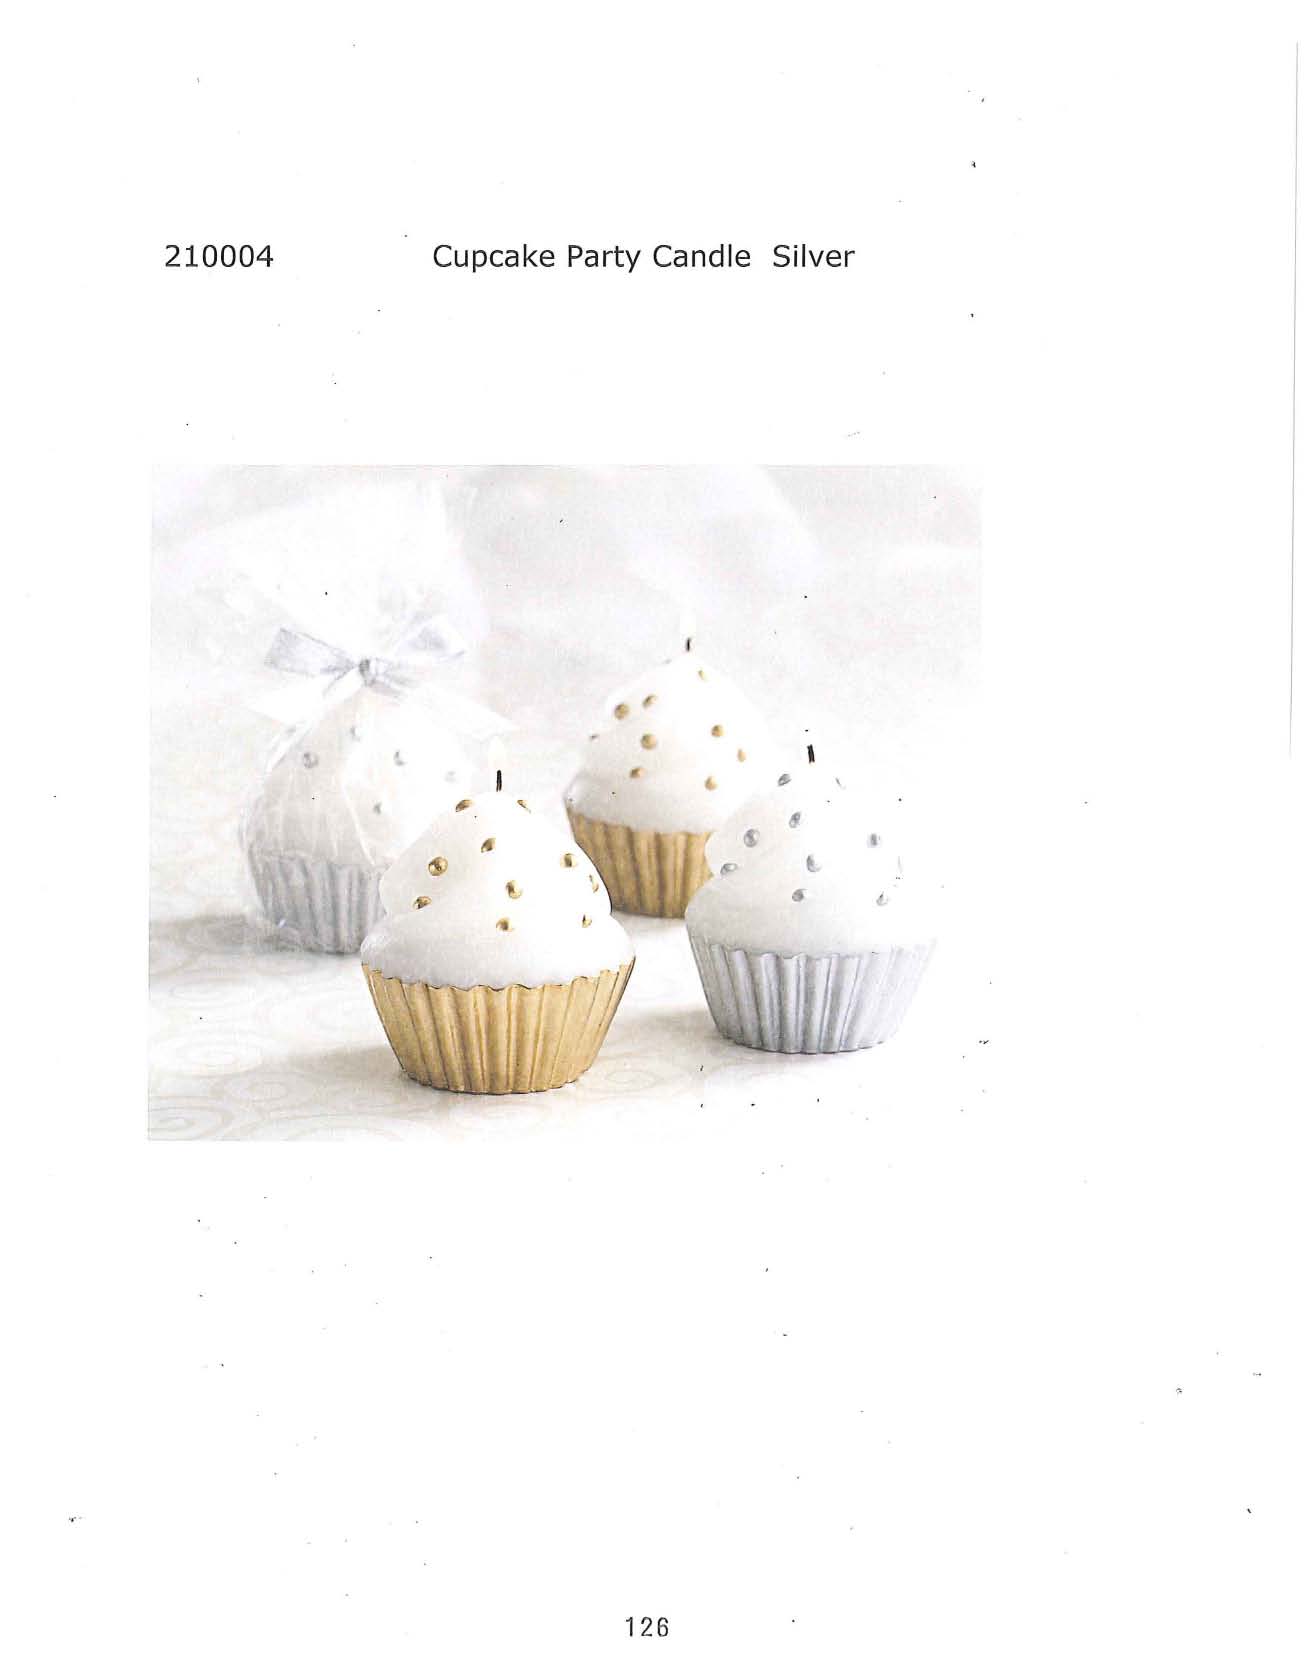 Cupcake Party Candle - Silver